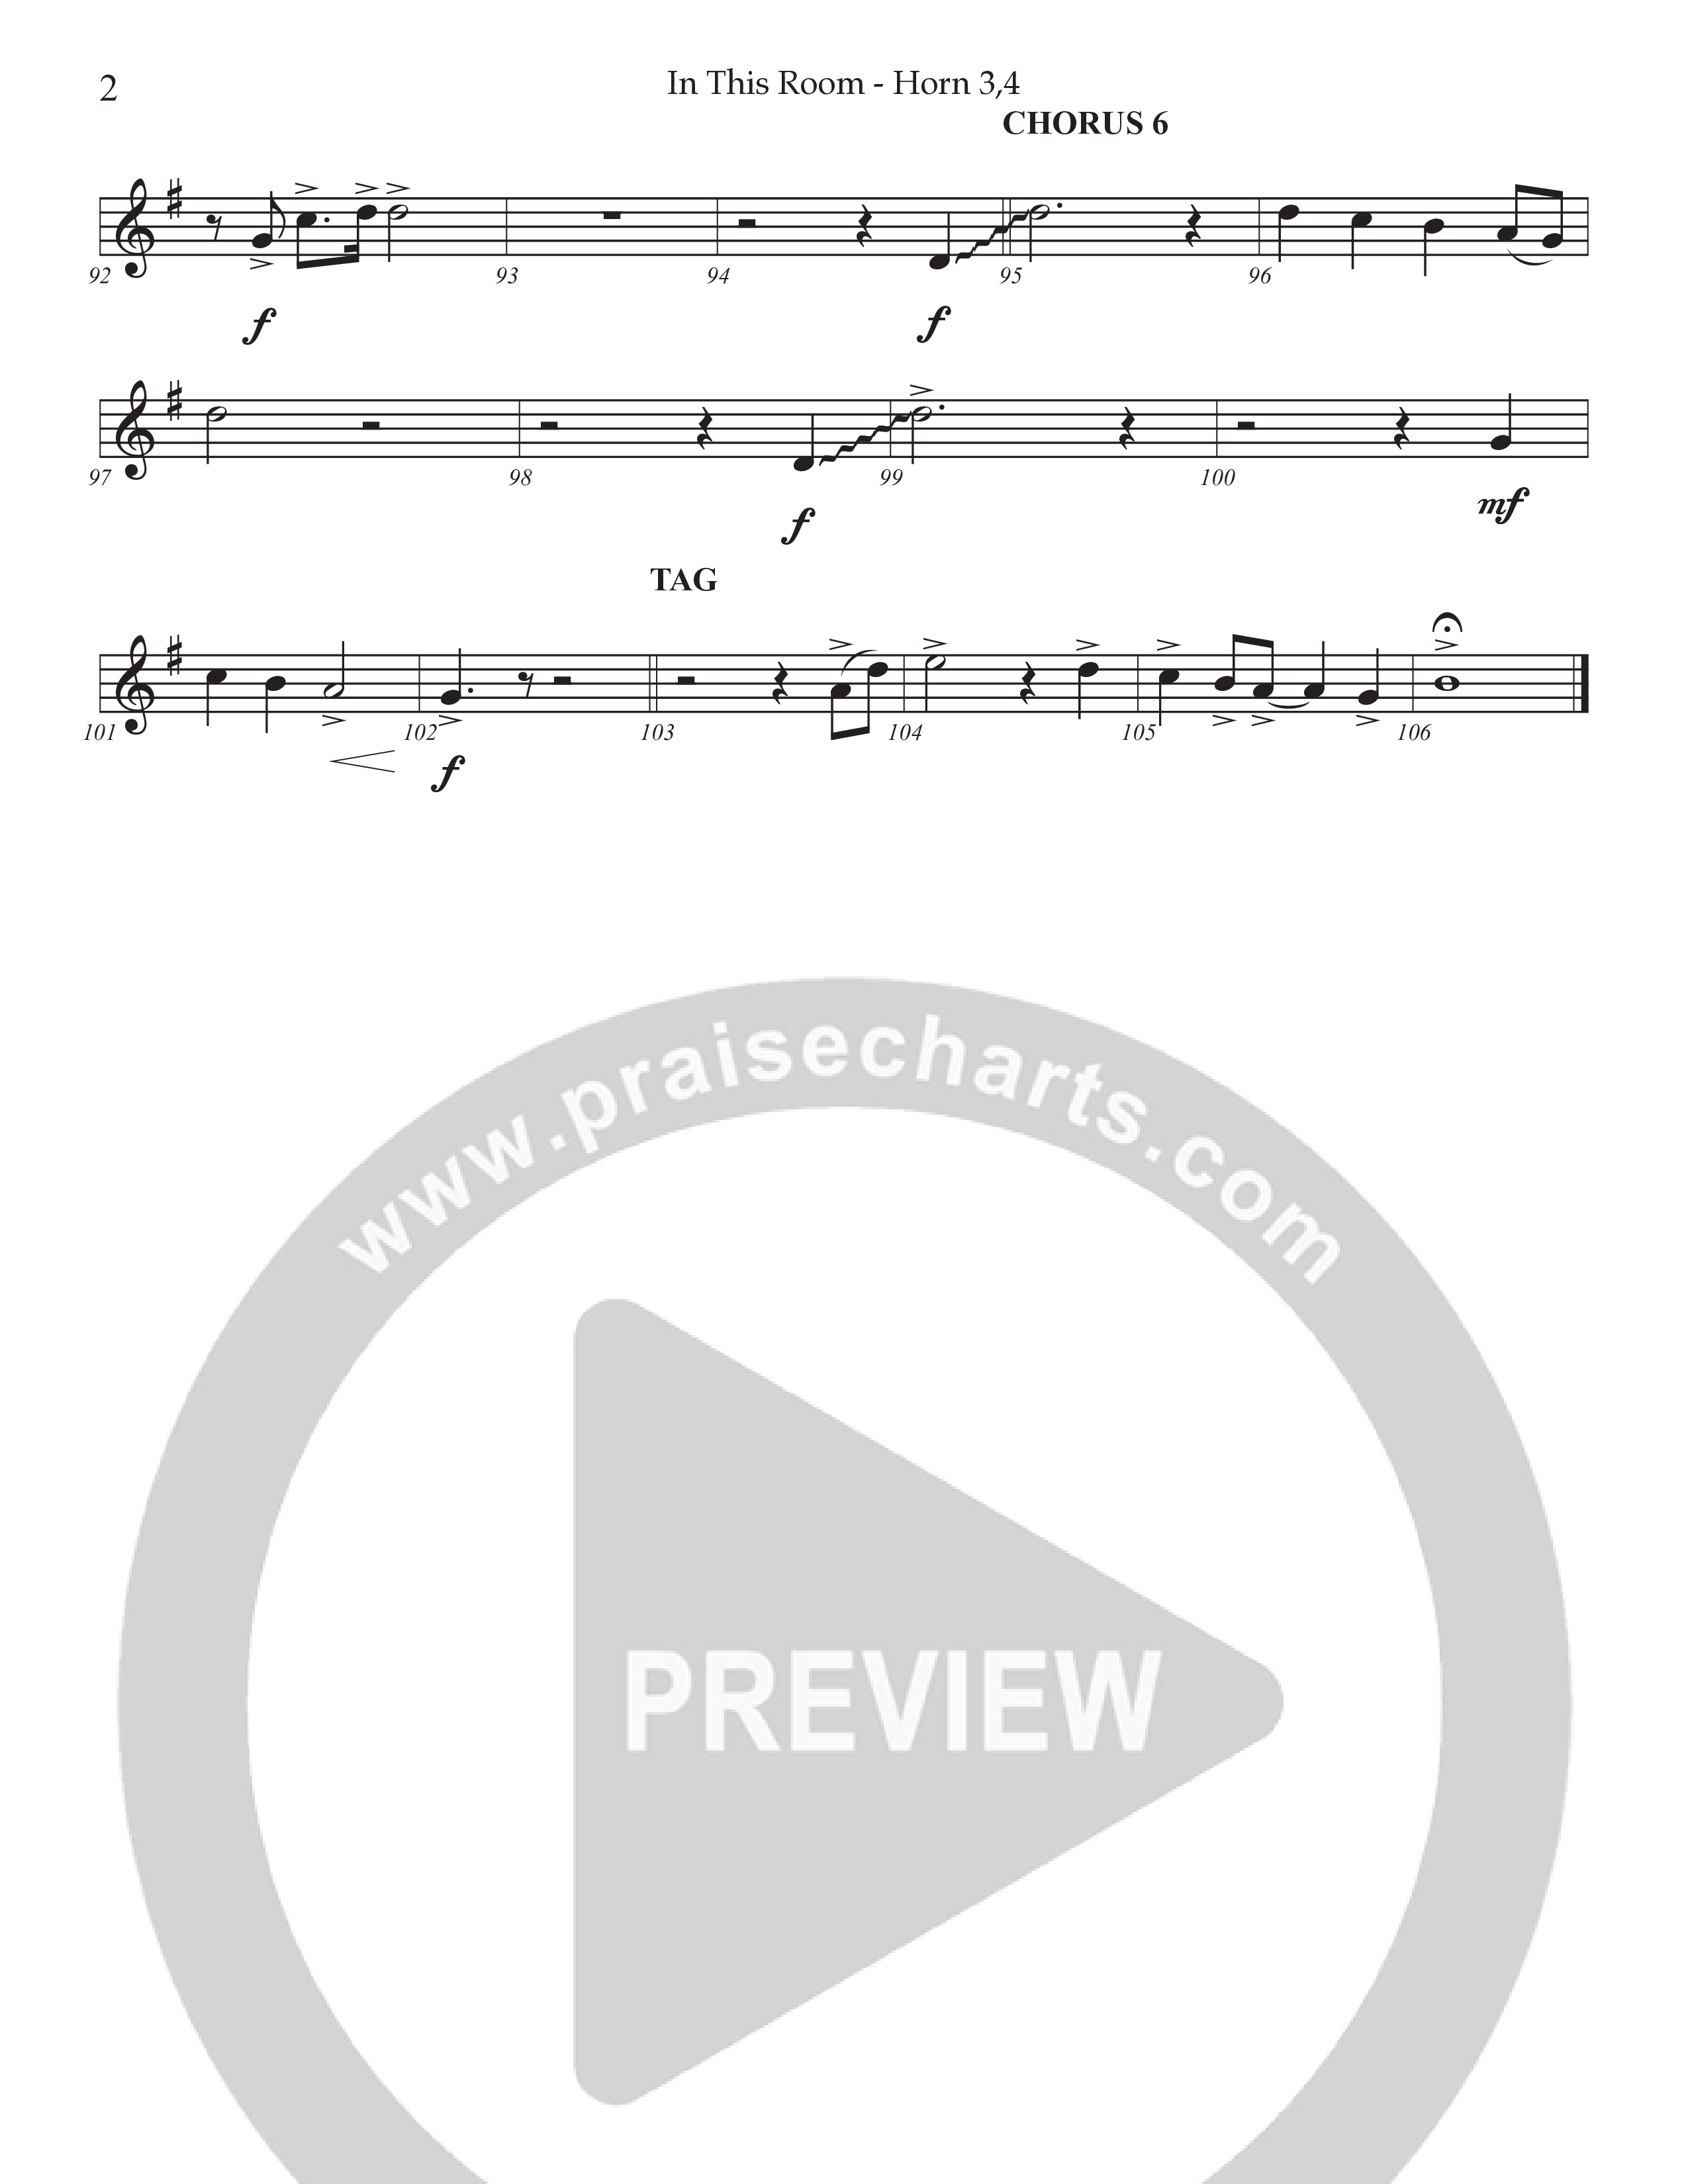 In This Room French Horn 3 (Prestonwood Worship / Arr. Dylan McNab / Orch. Johann Acuna)